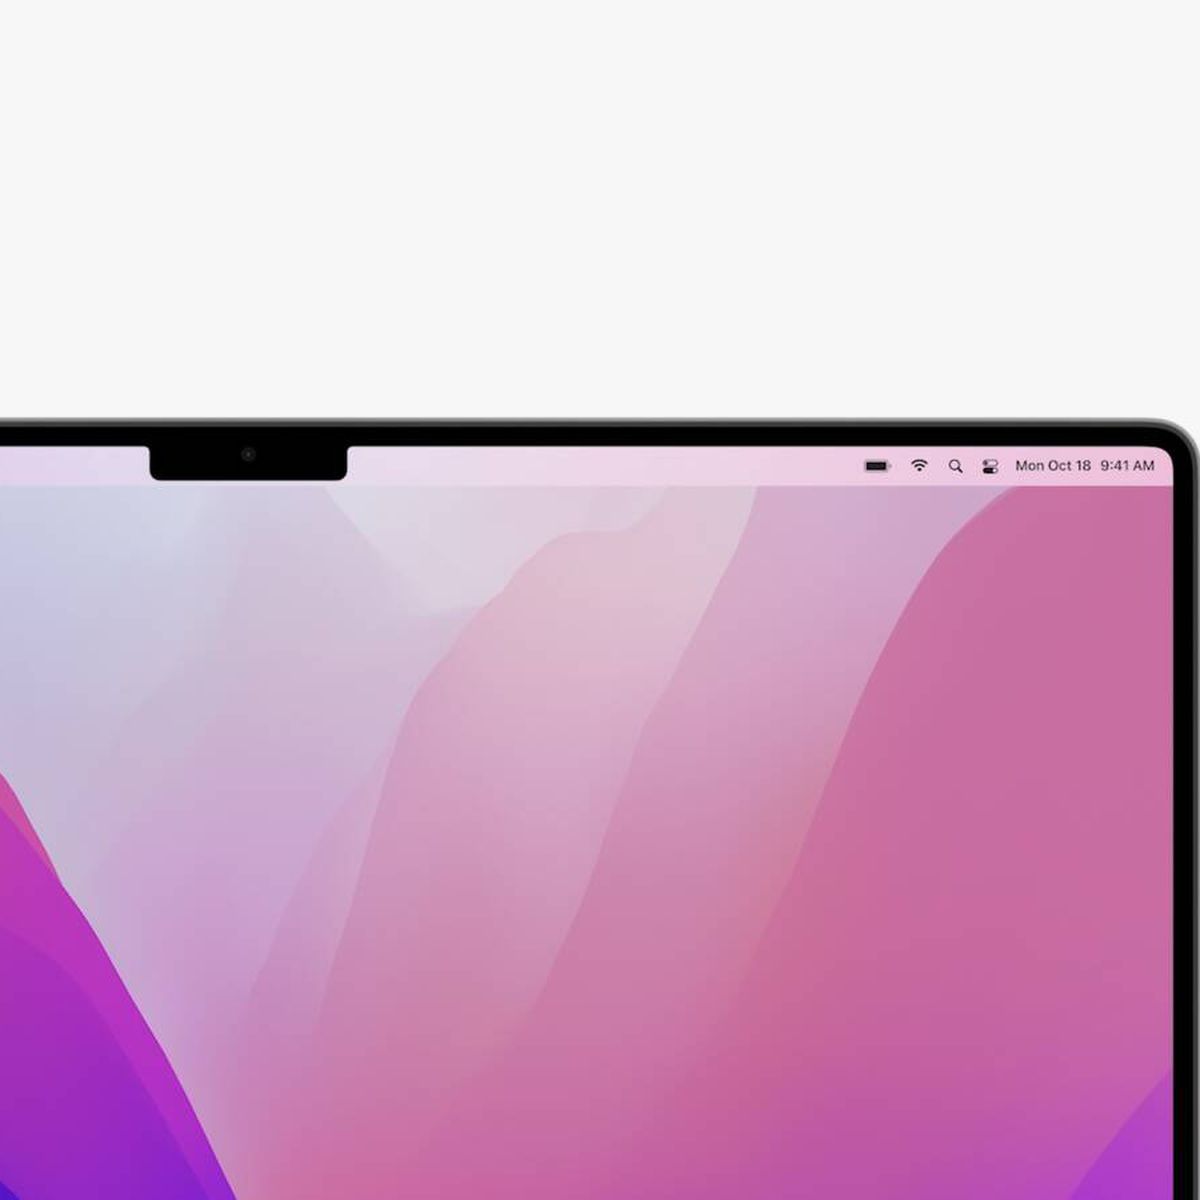 New MacBook Pro Finally Features a 1080p Webcam Within a Notch - MacRumors